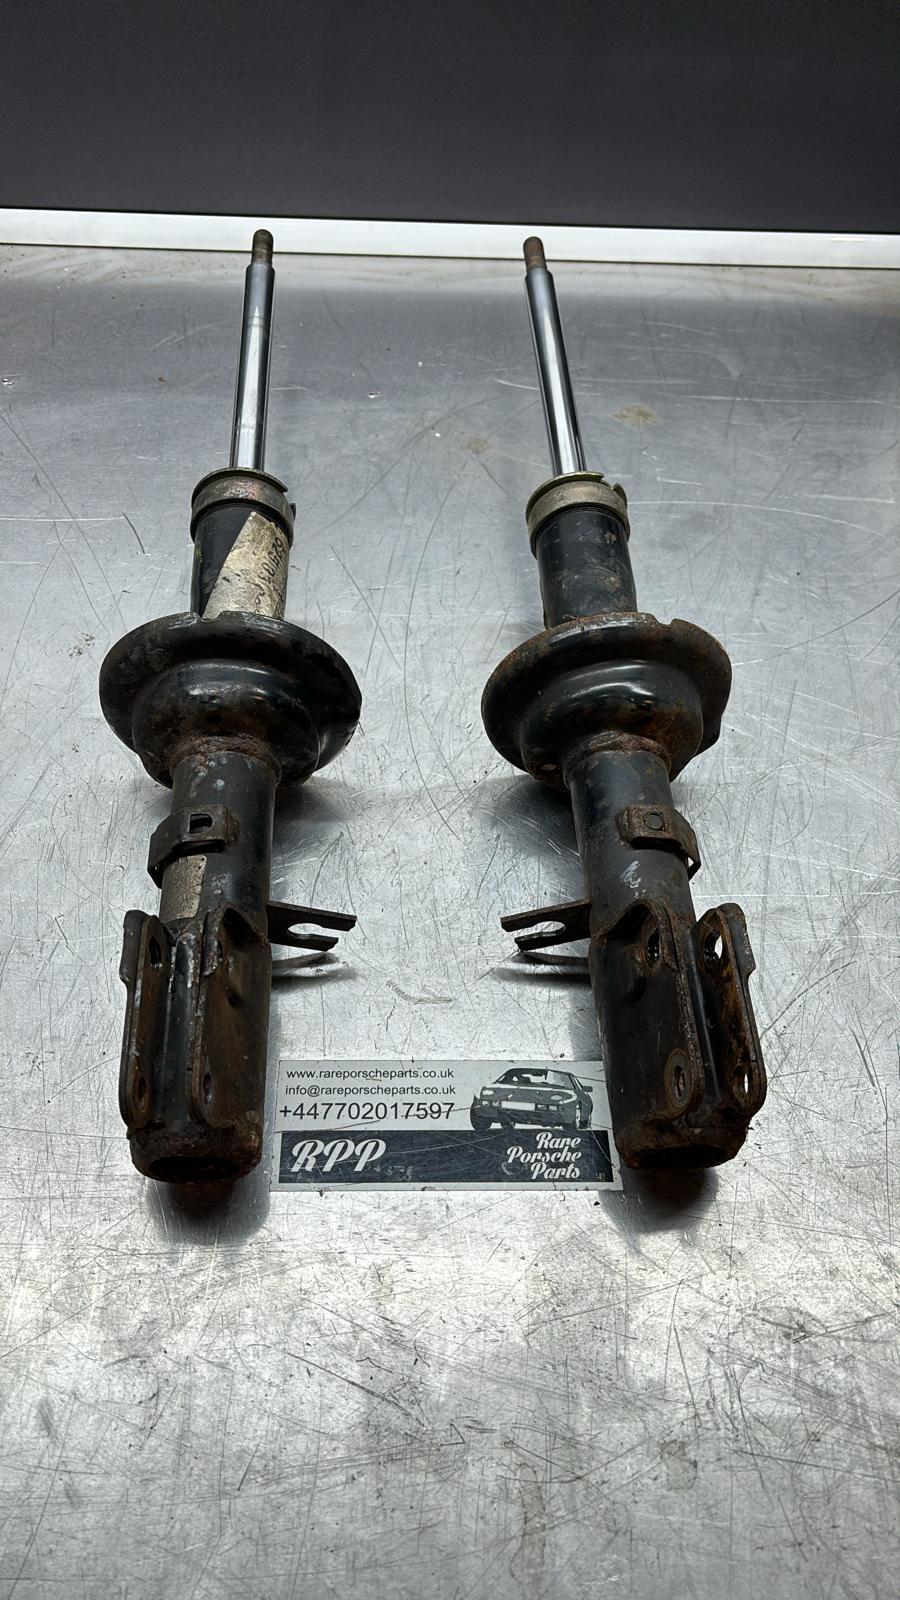 Porsche 924S / 944 front pair of front shock absorbers, used 94434303112 / 94434303212